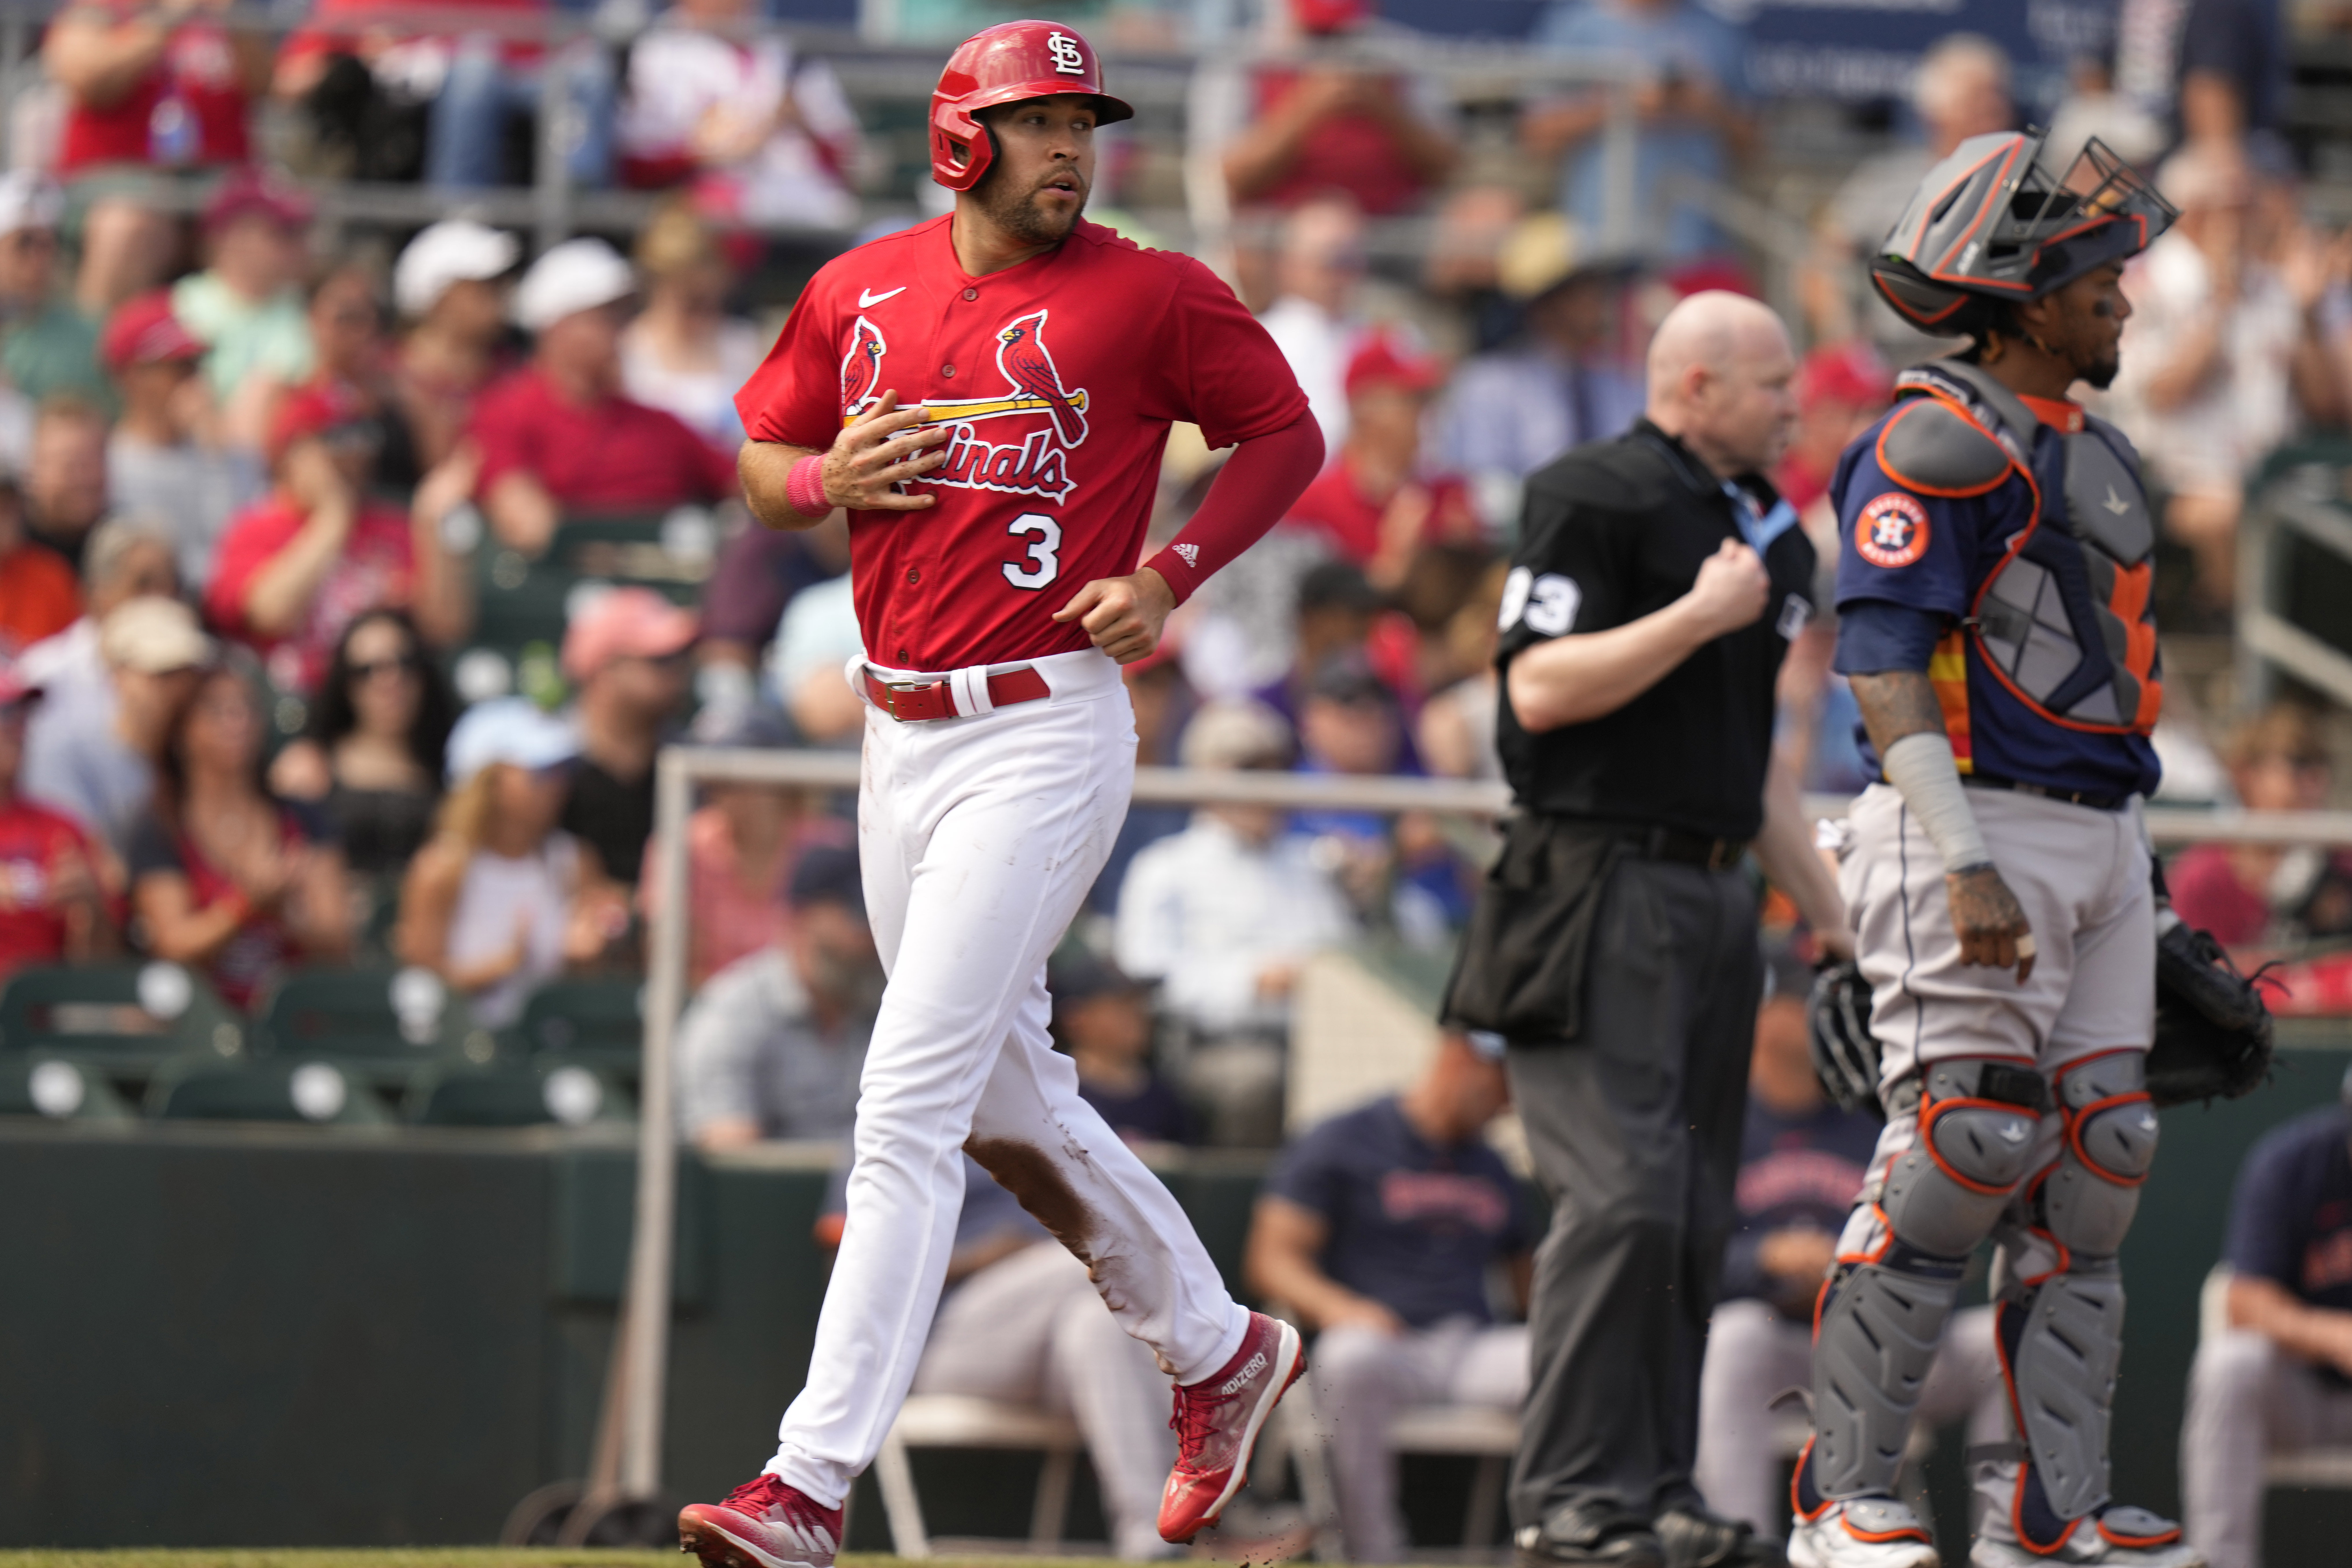 Reports: Pujols Heading Back To Cardinals On 1-Year Deal